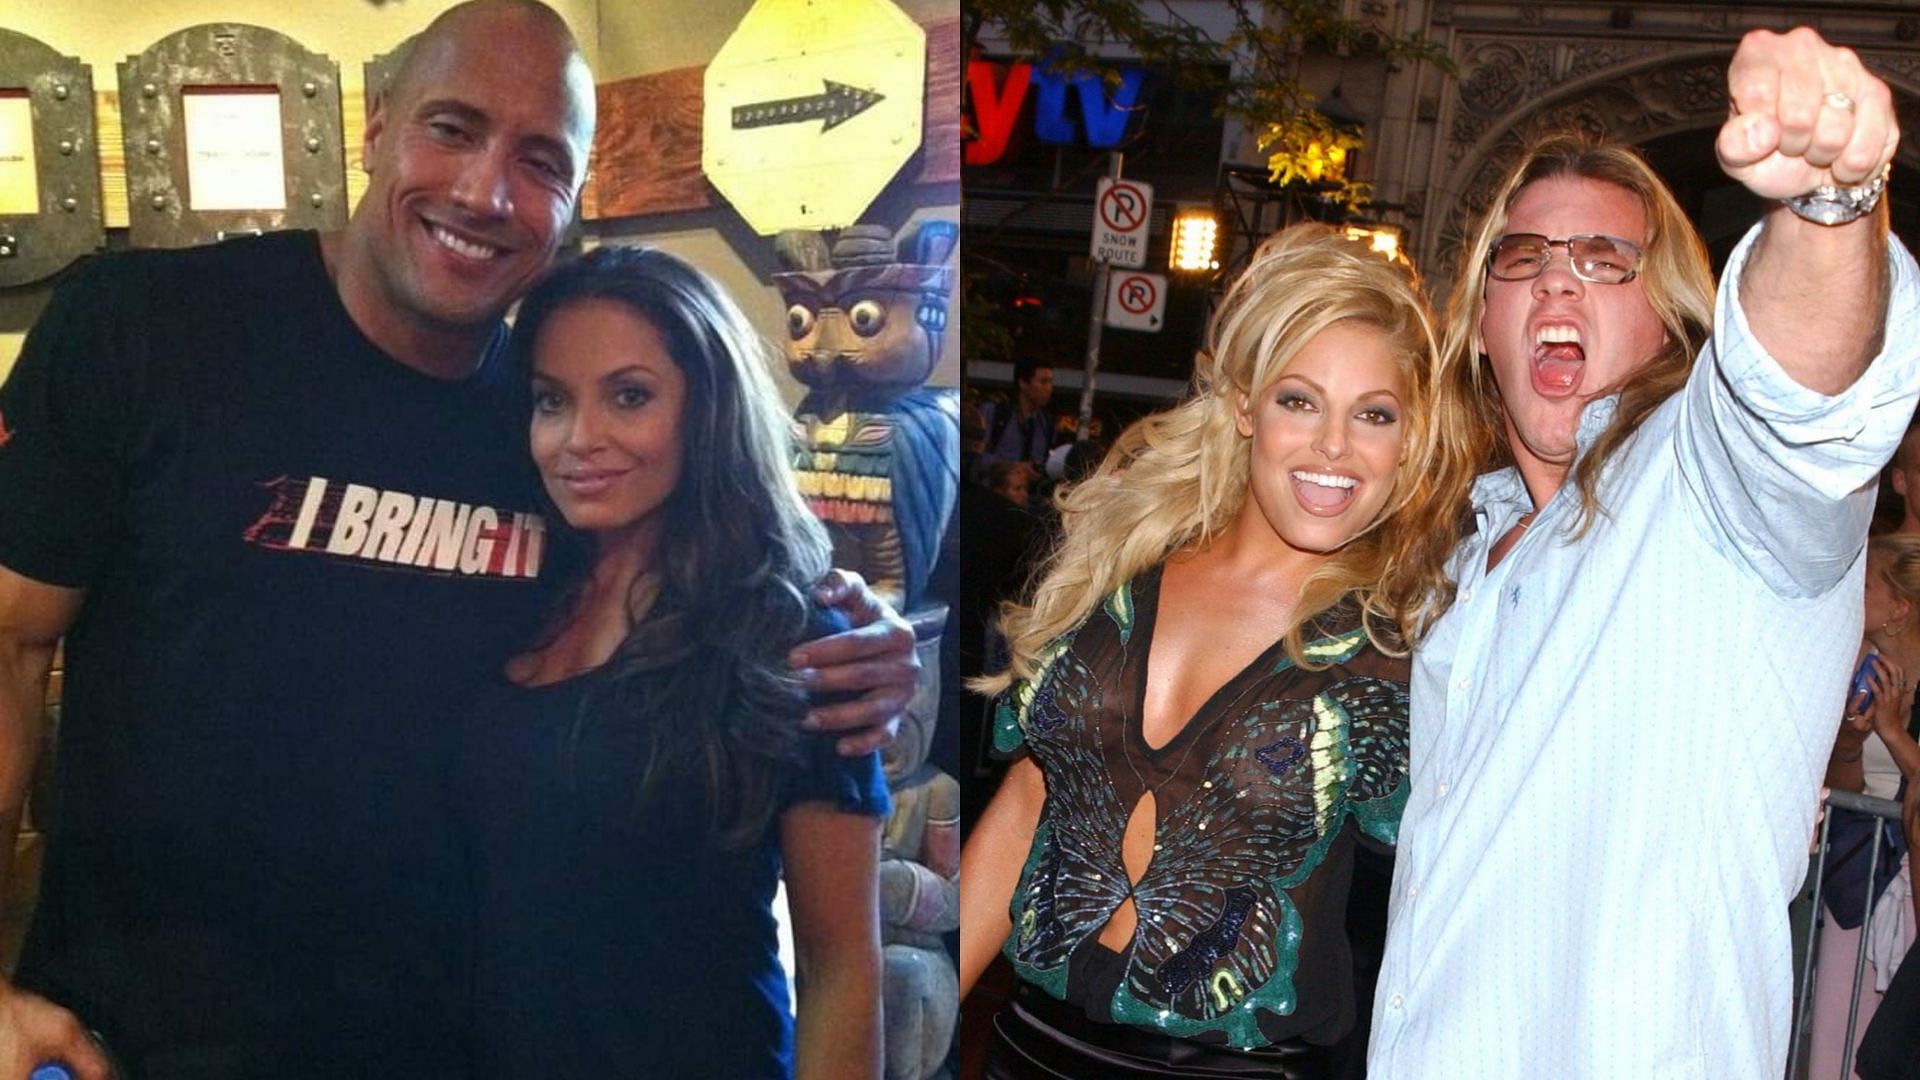 5 men that WWE Hall of Famer Trish Stratus has been romantically linked